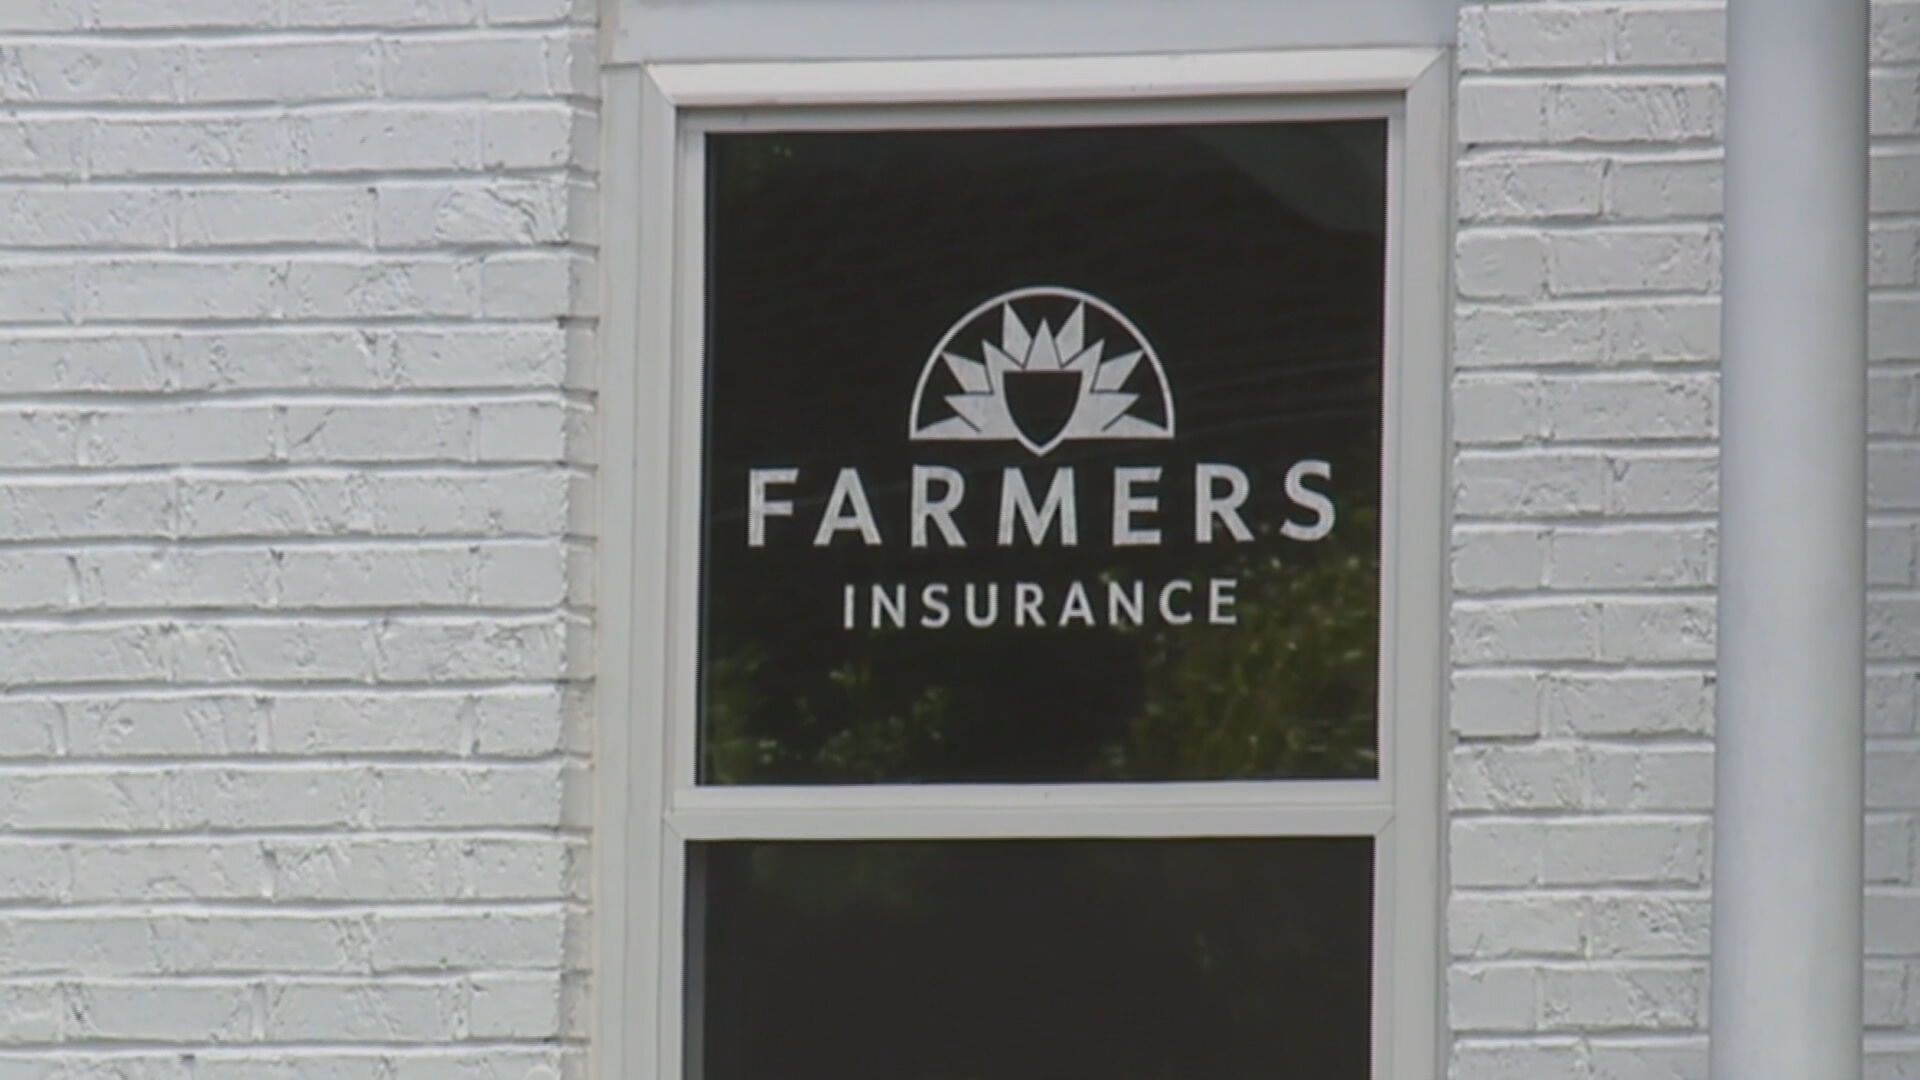 Heres what to know as Farmers Insurance begins withdrawal from Florida